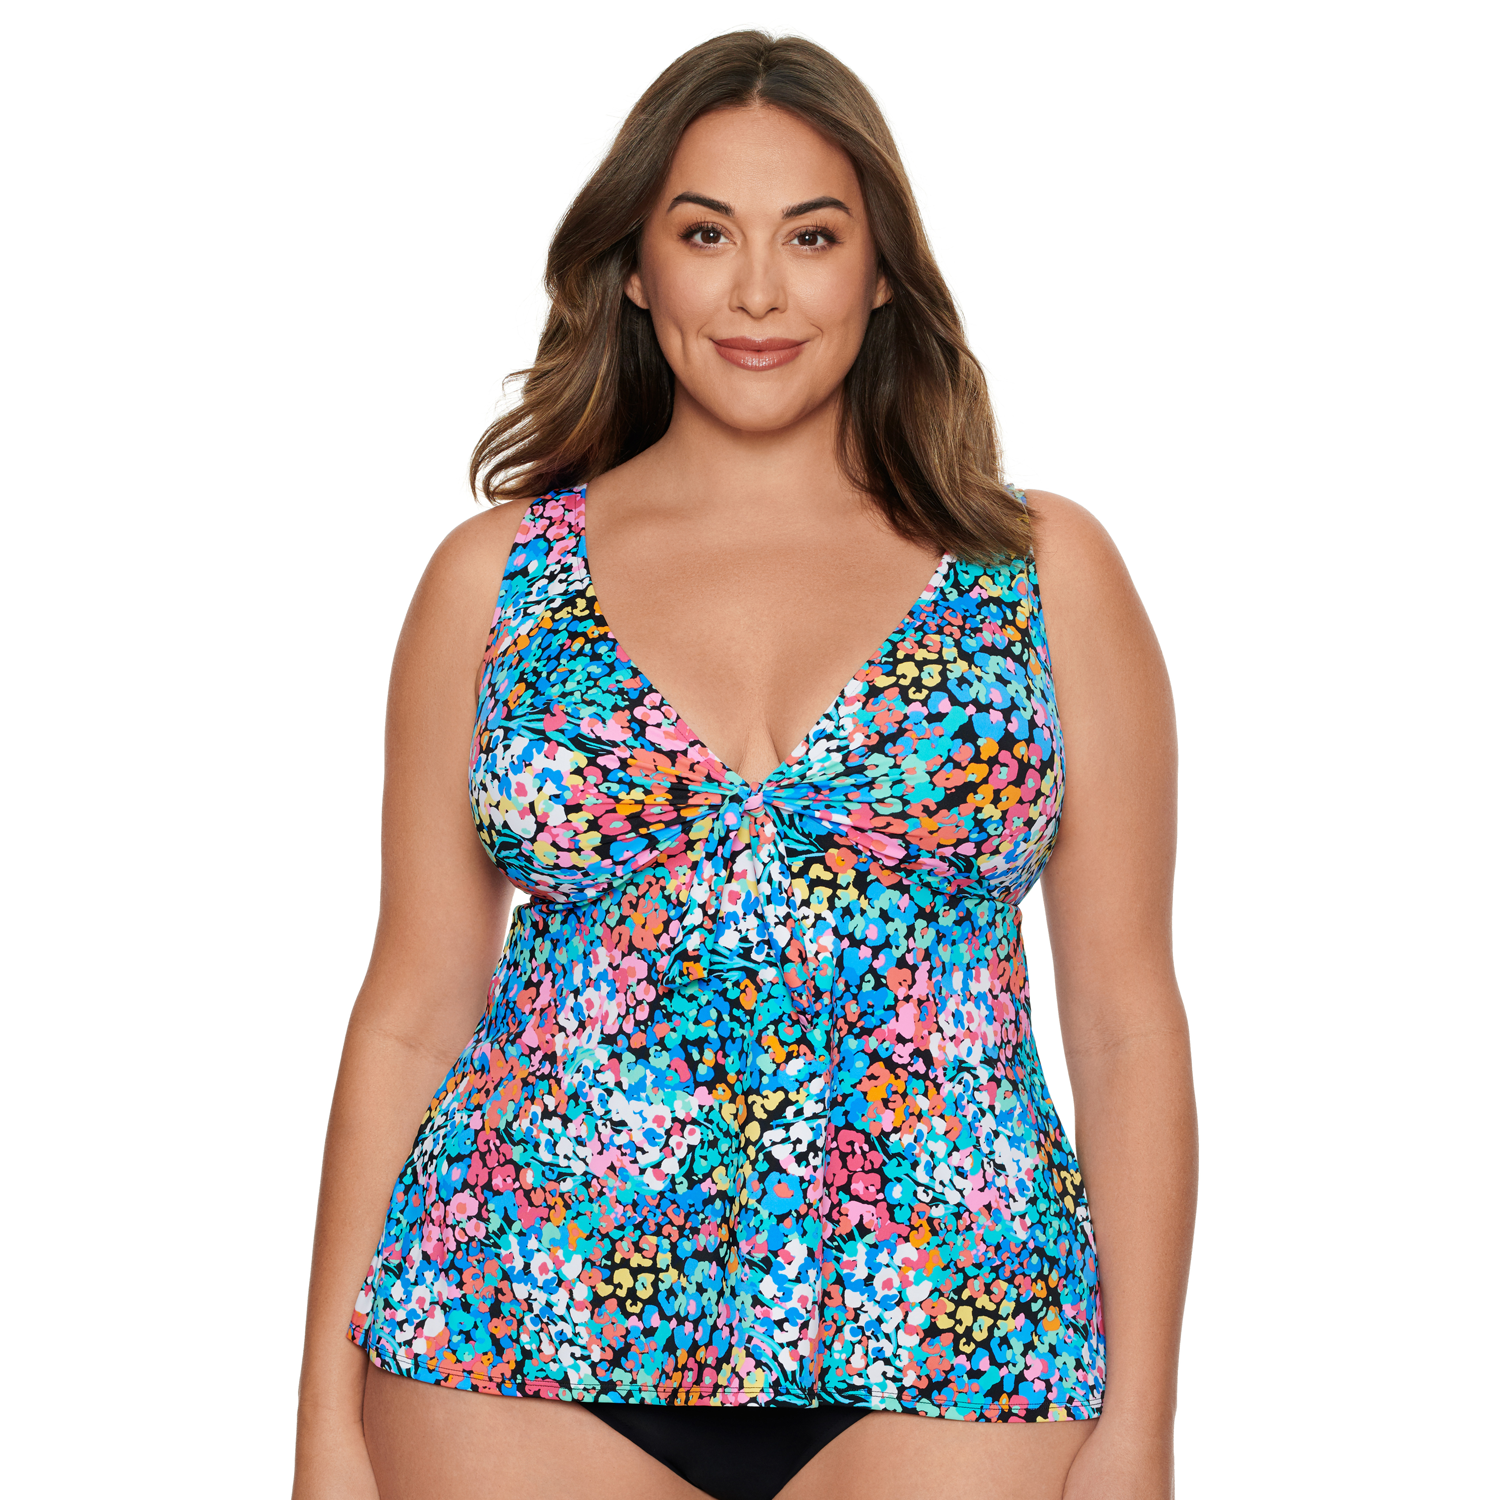 Penbrooke Women's Swimsuit Top - Swimsuits Just For Us.com